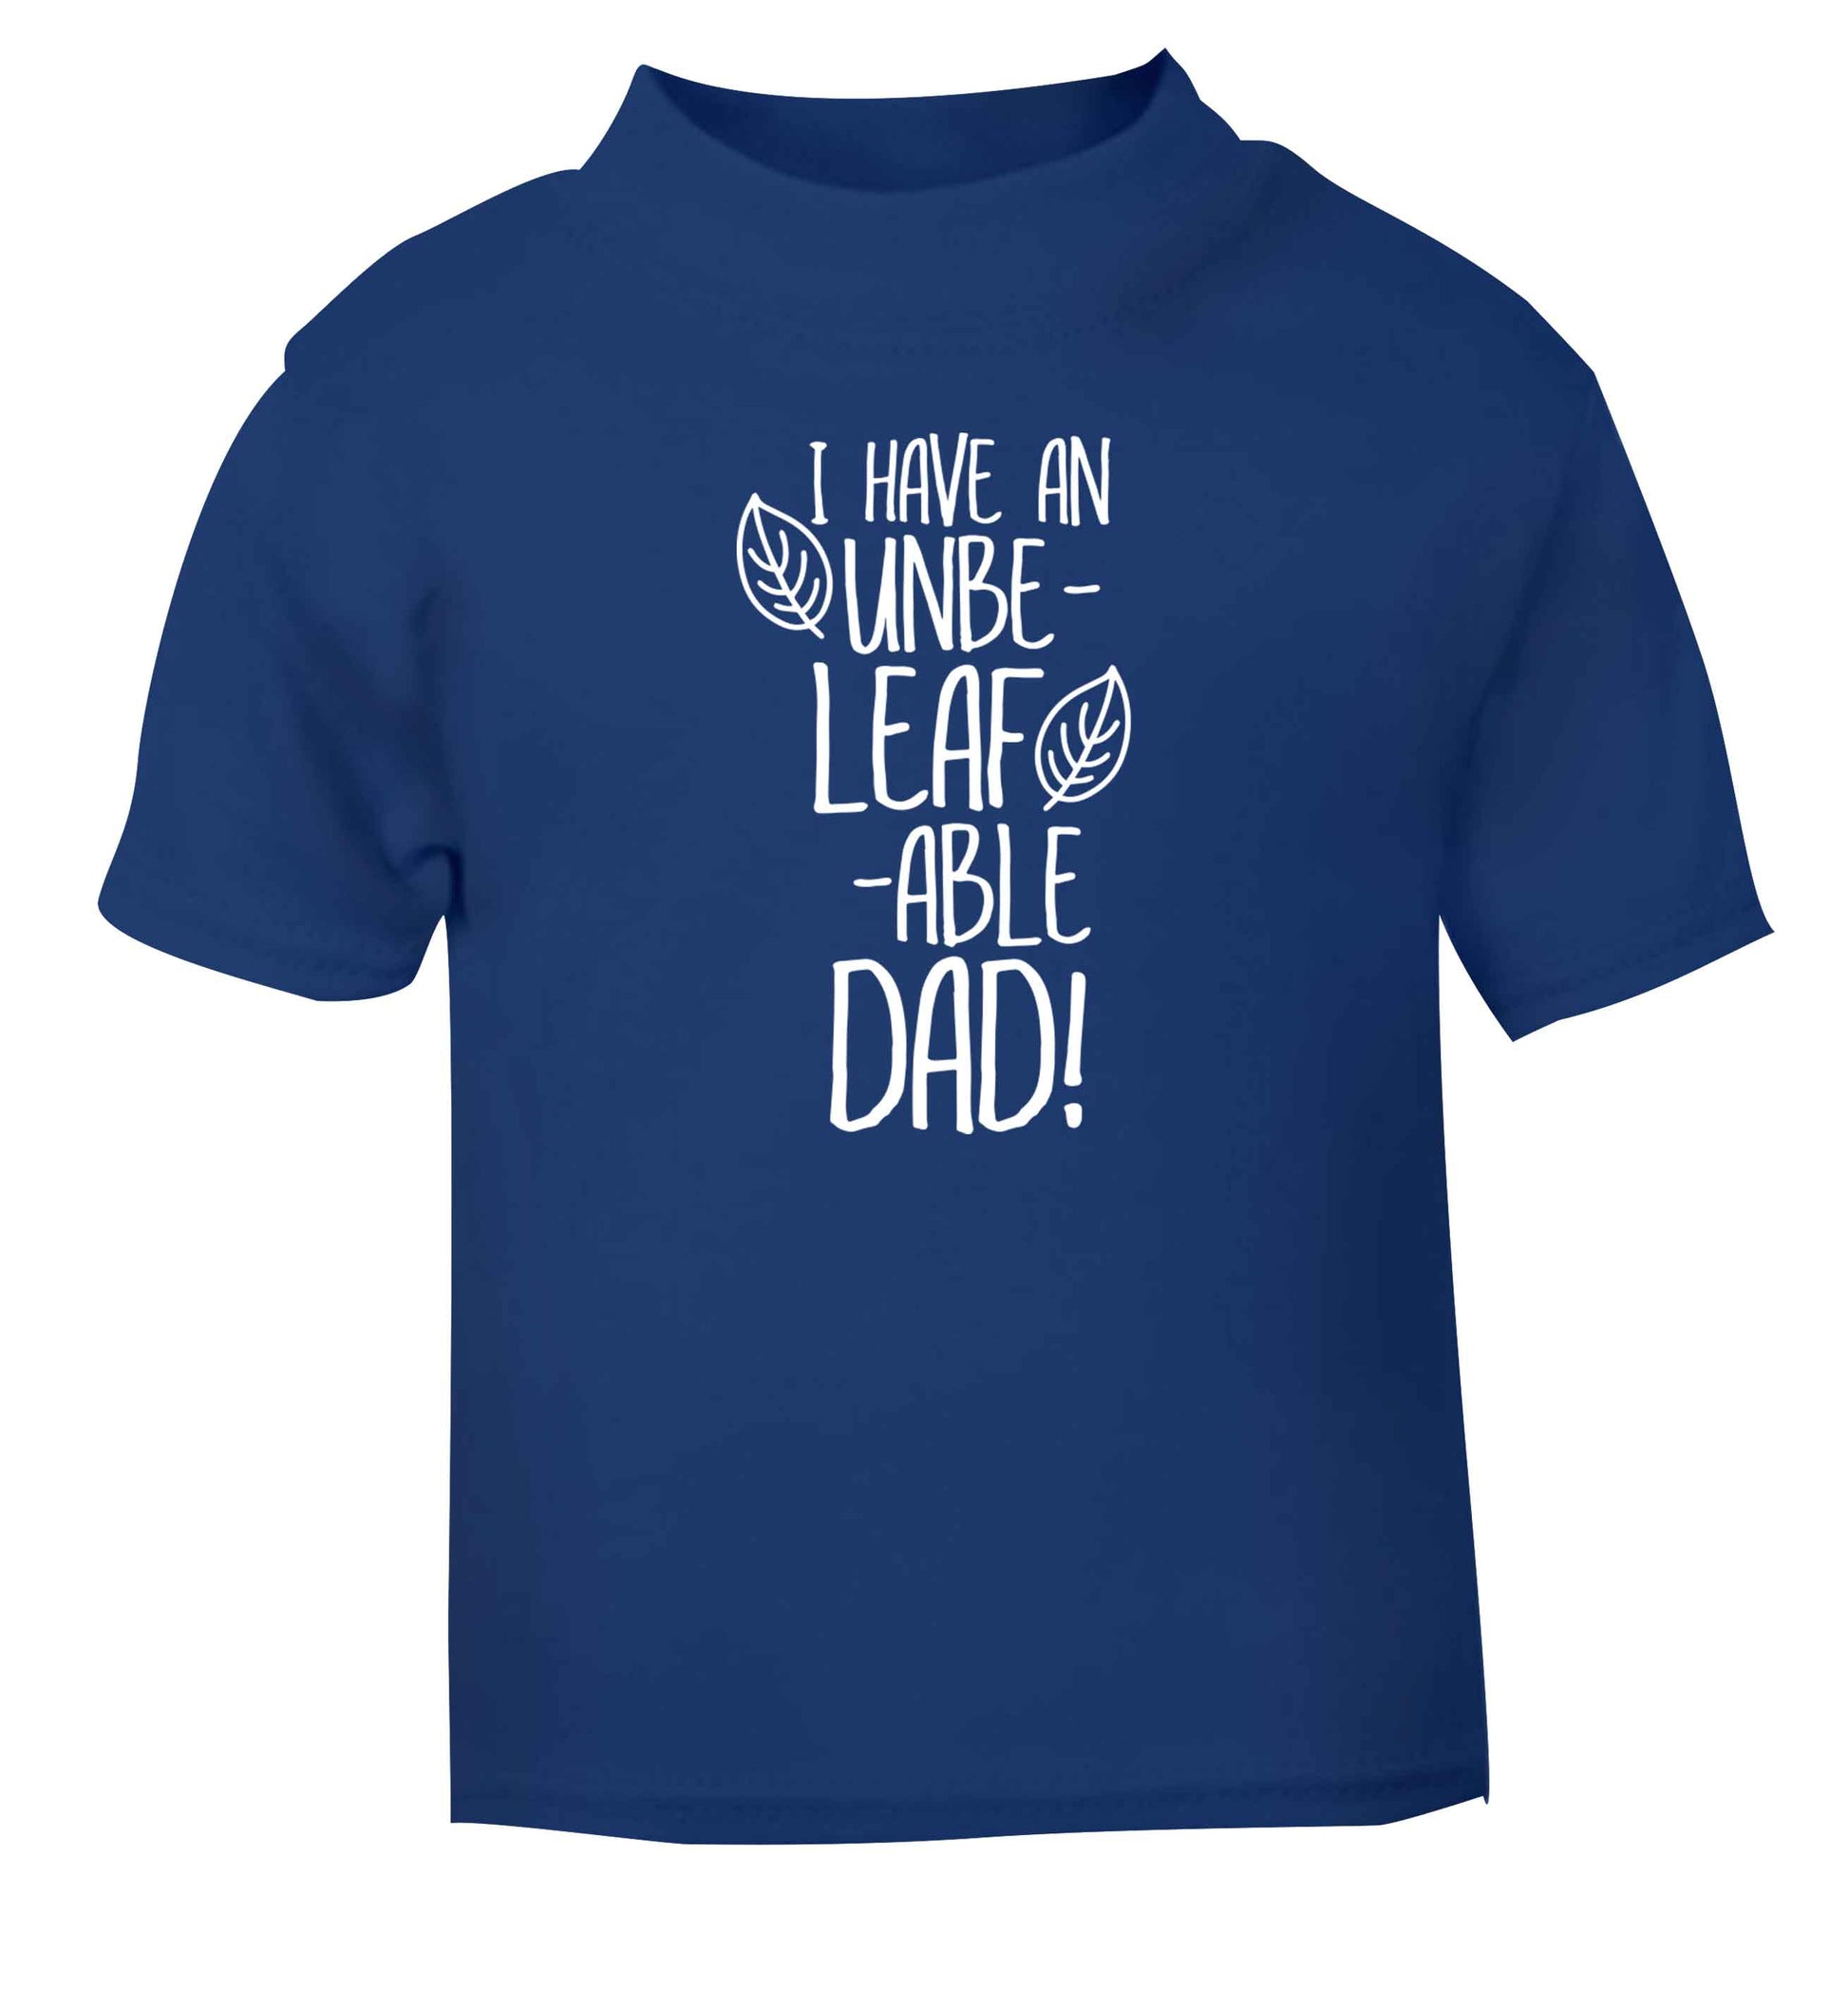 I have an unbe-leaf-able dad blue Baby Toddler Tshirt 2 Years